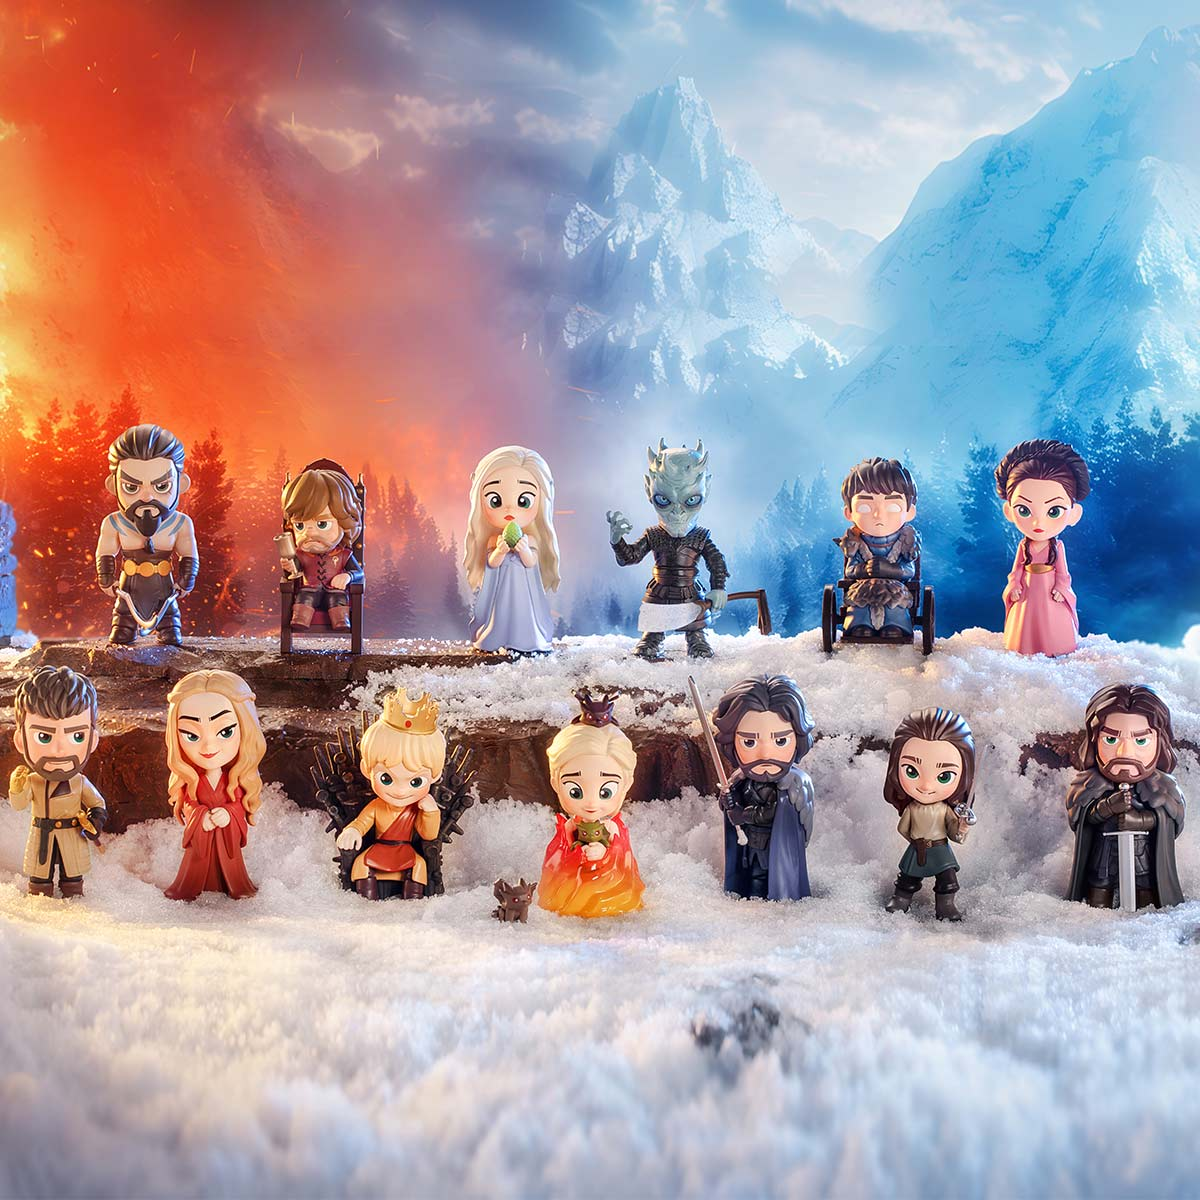 POP MART Game of Thrones Series-Single Box (Random)-Pop Mart-Ace Cards &amp; Collectibles